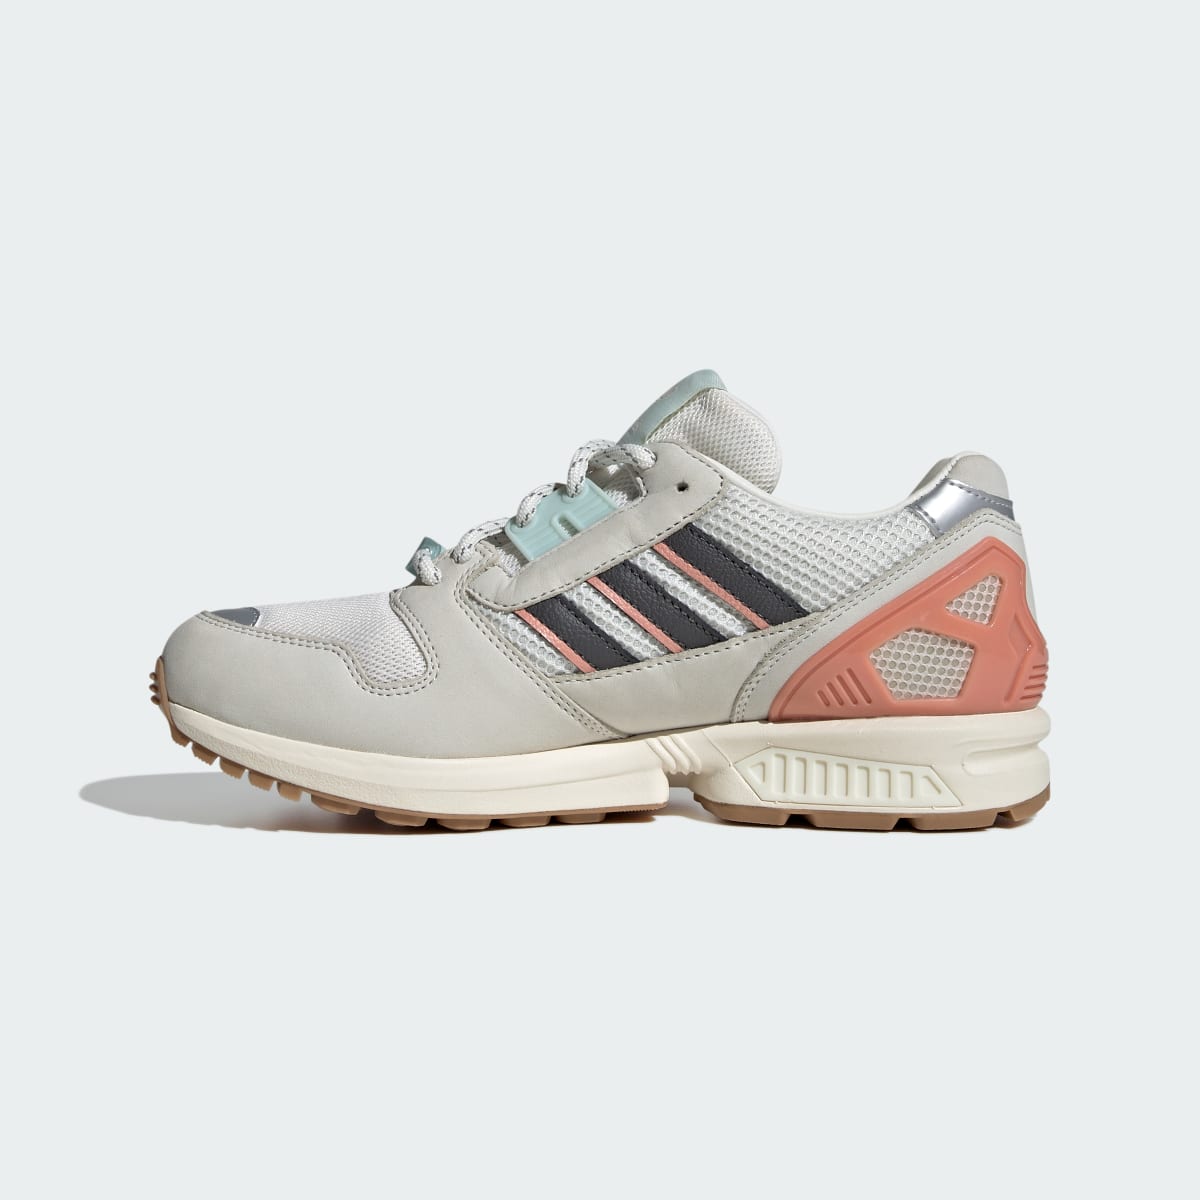 Adidas ZX 8000 Shoes. 7